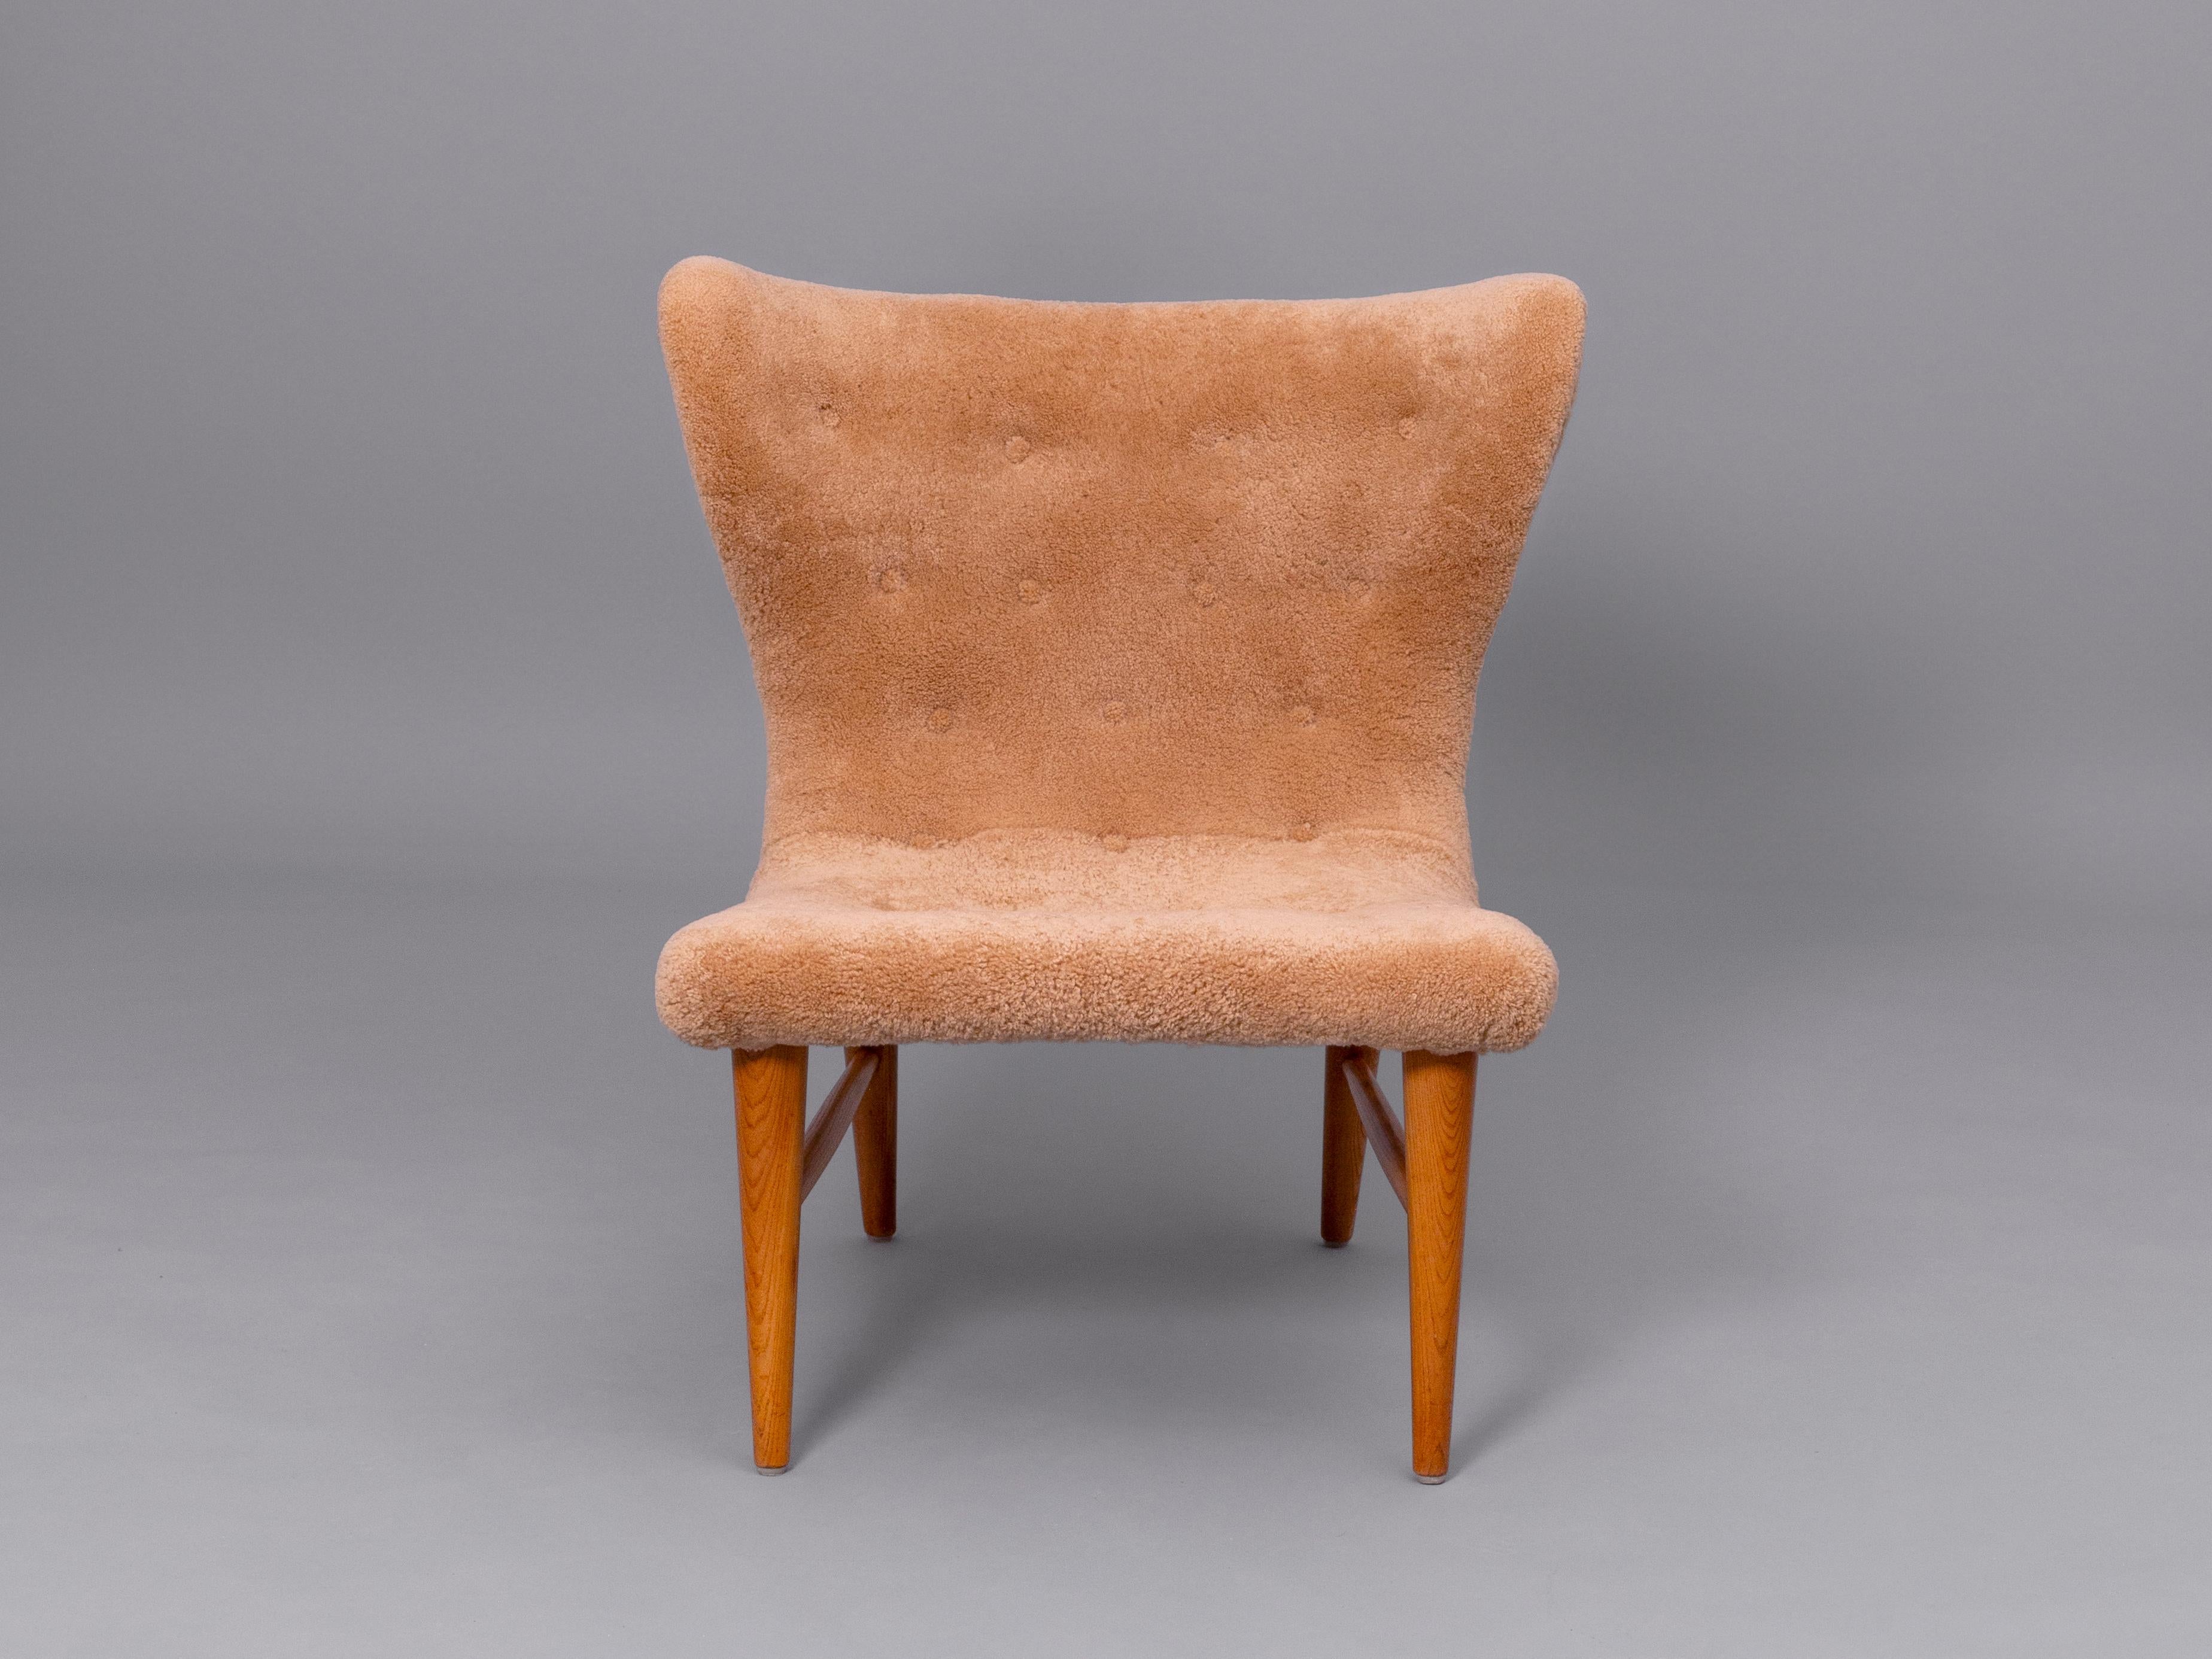 Armchair in beech wood, model ‘NR 86’ designed by Erik Karlén for Raumsinteriör. Sweden, 1960s
This design features a curved shape that reminds us of nature itself, a shape that is embracing and confortable. The designer uses simple lines and a